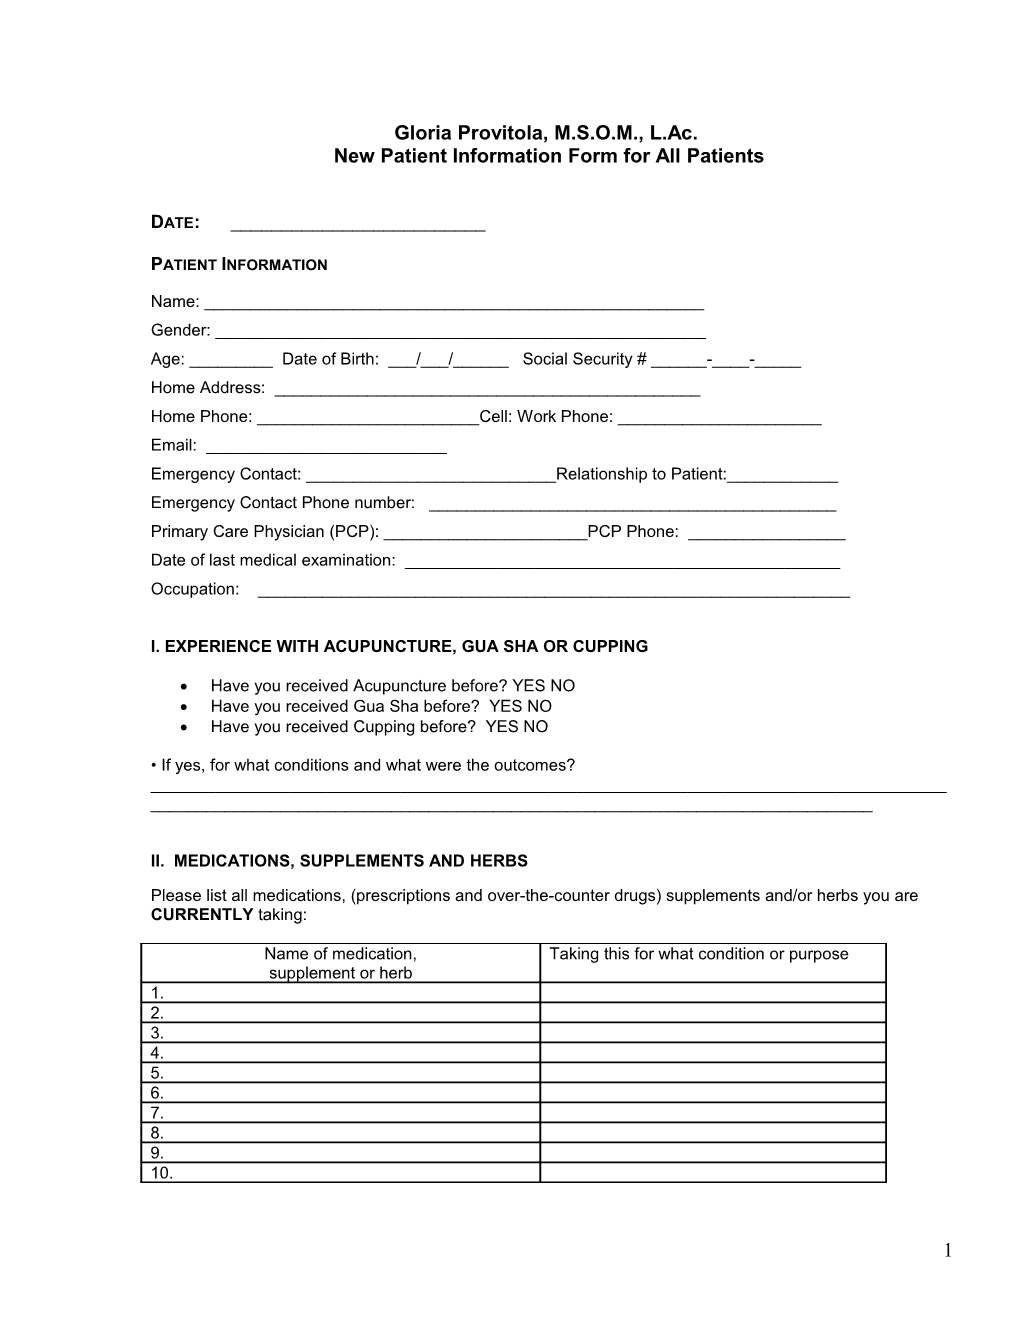 New Patient Informationform for All Patients